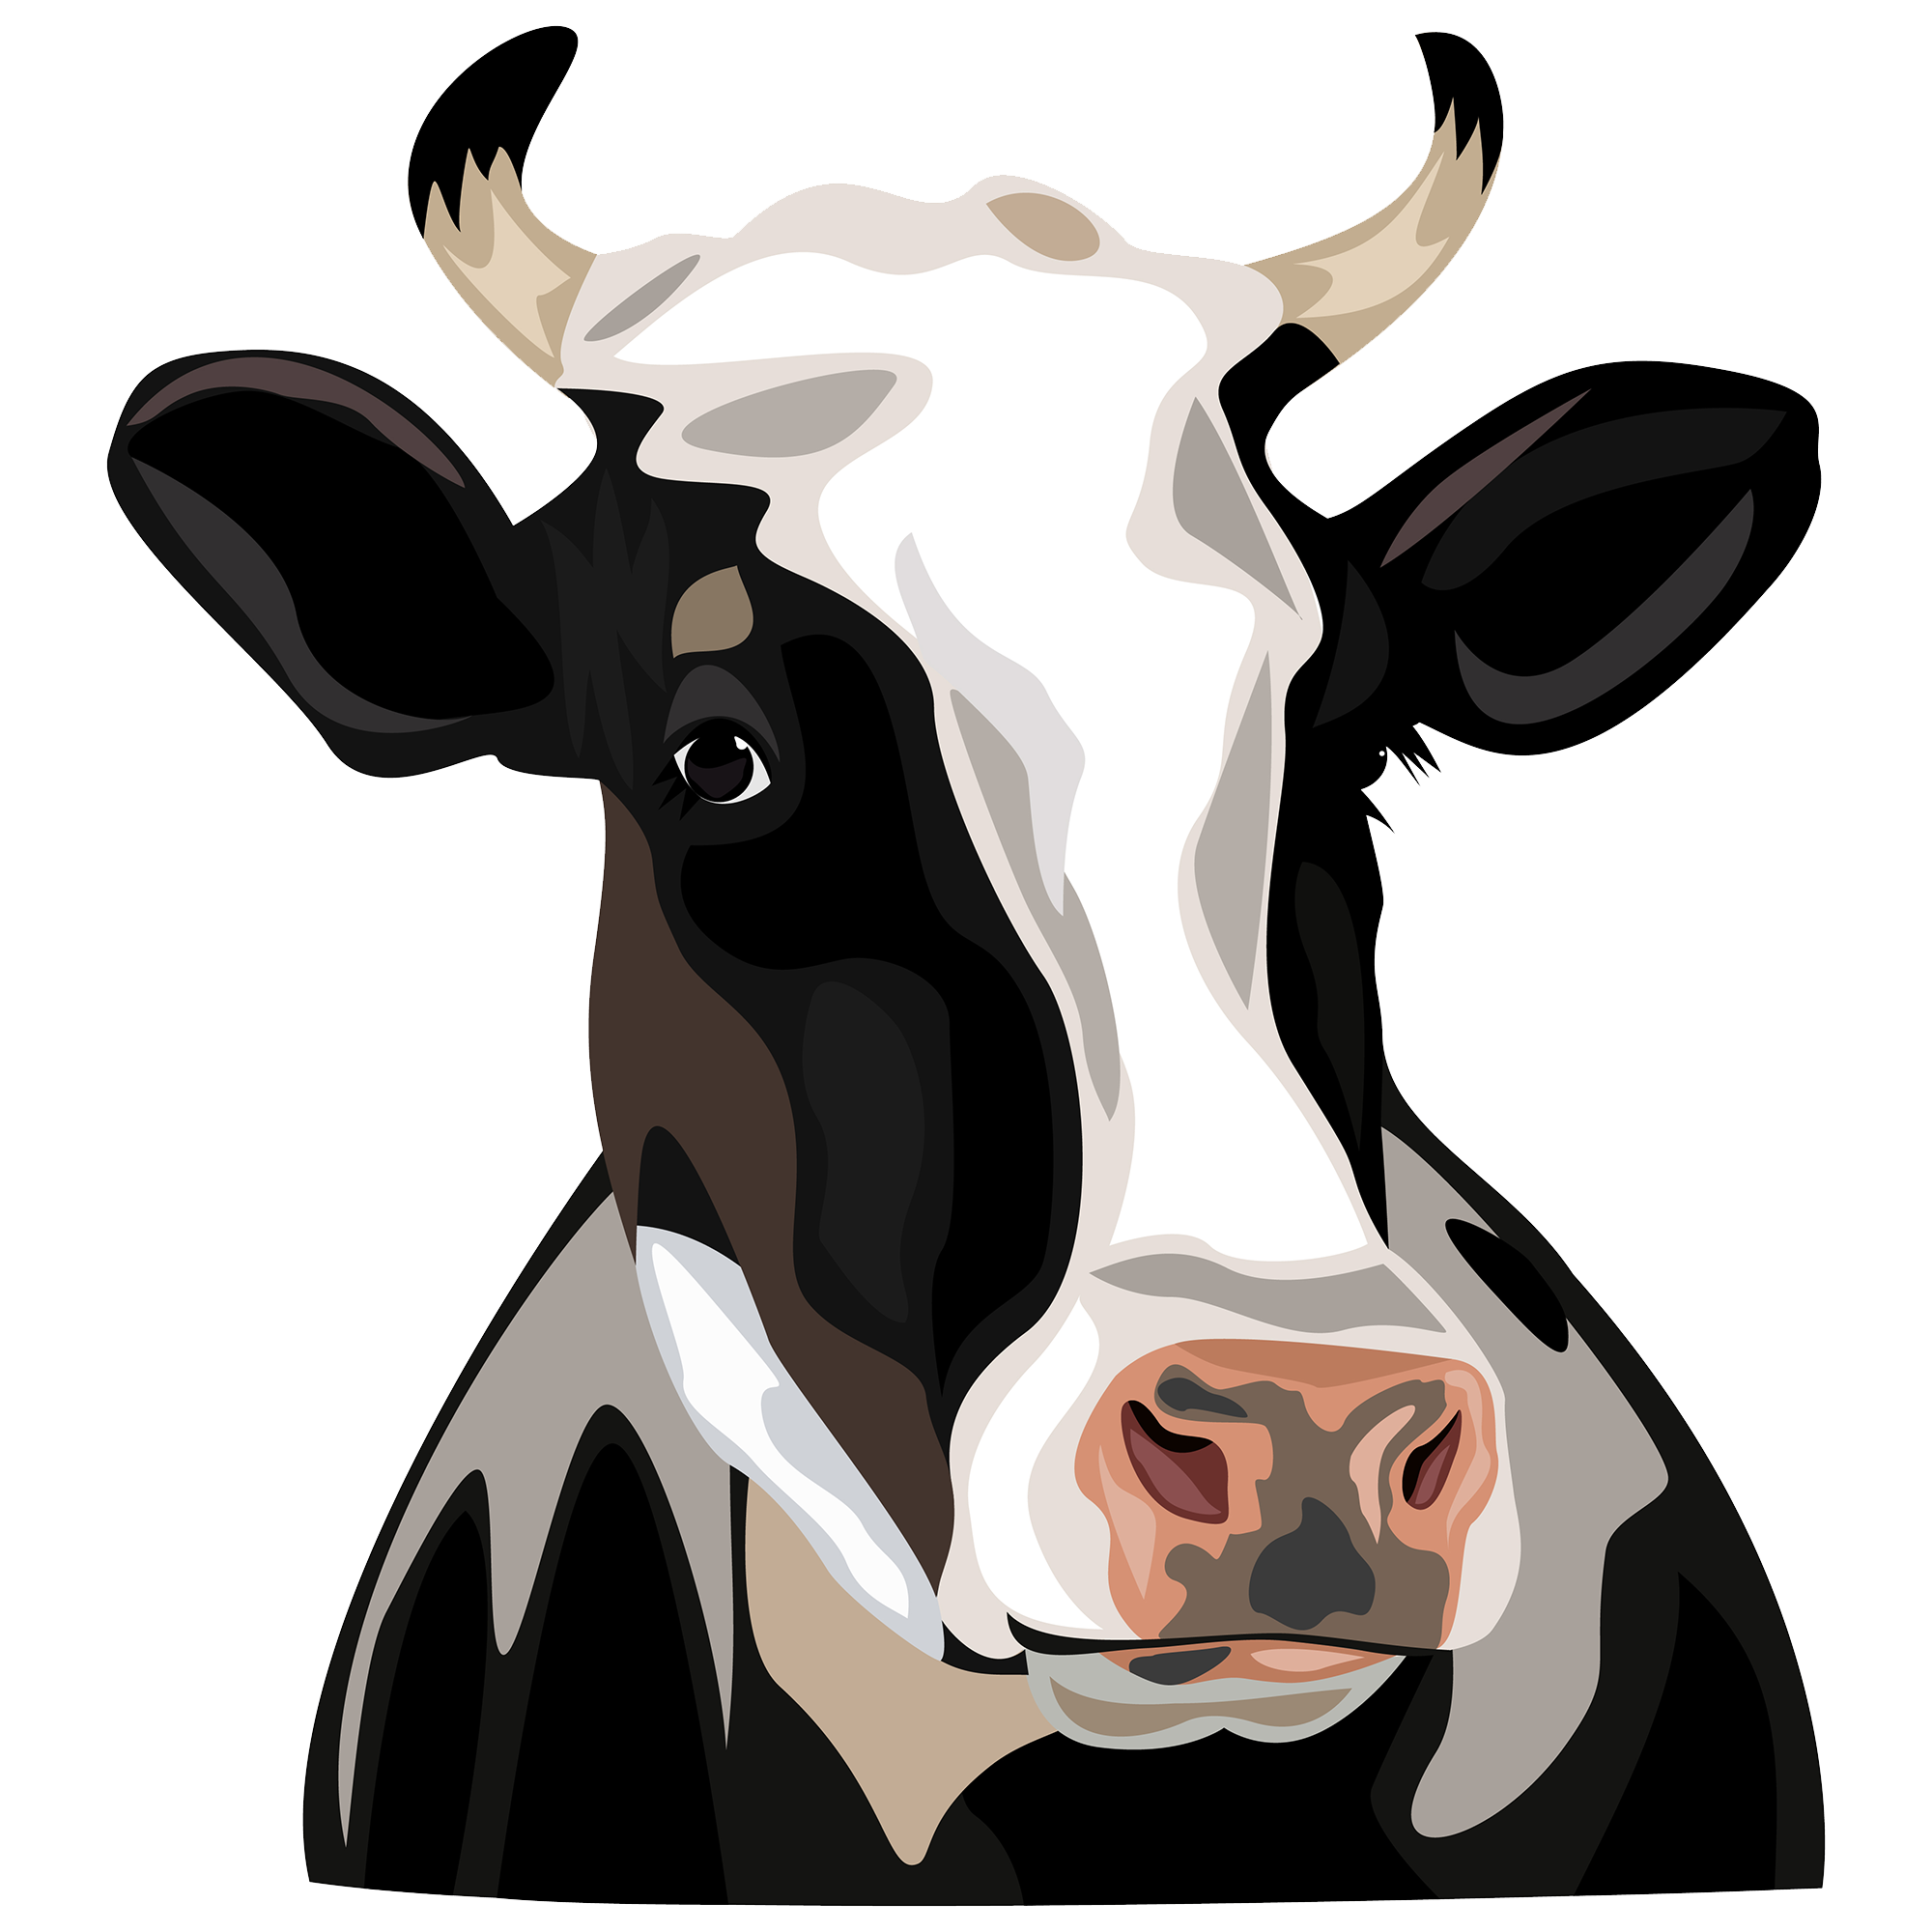 0 Result Images of Cartoon Cow Face Png - PNG Image Collection